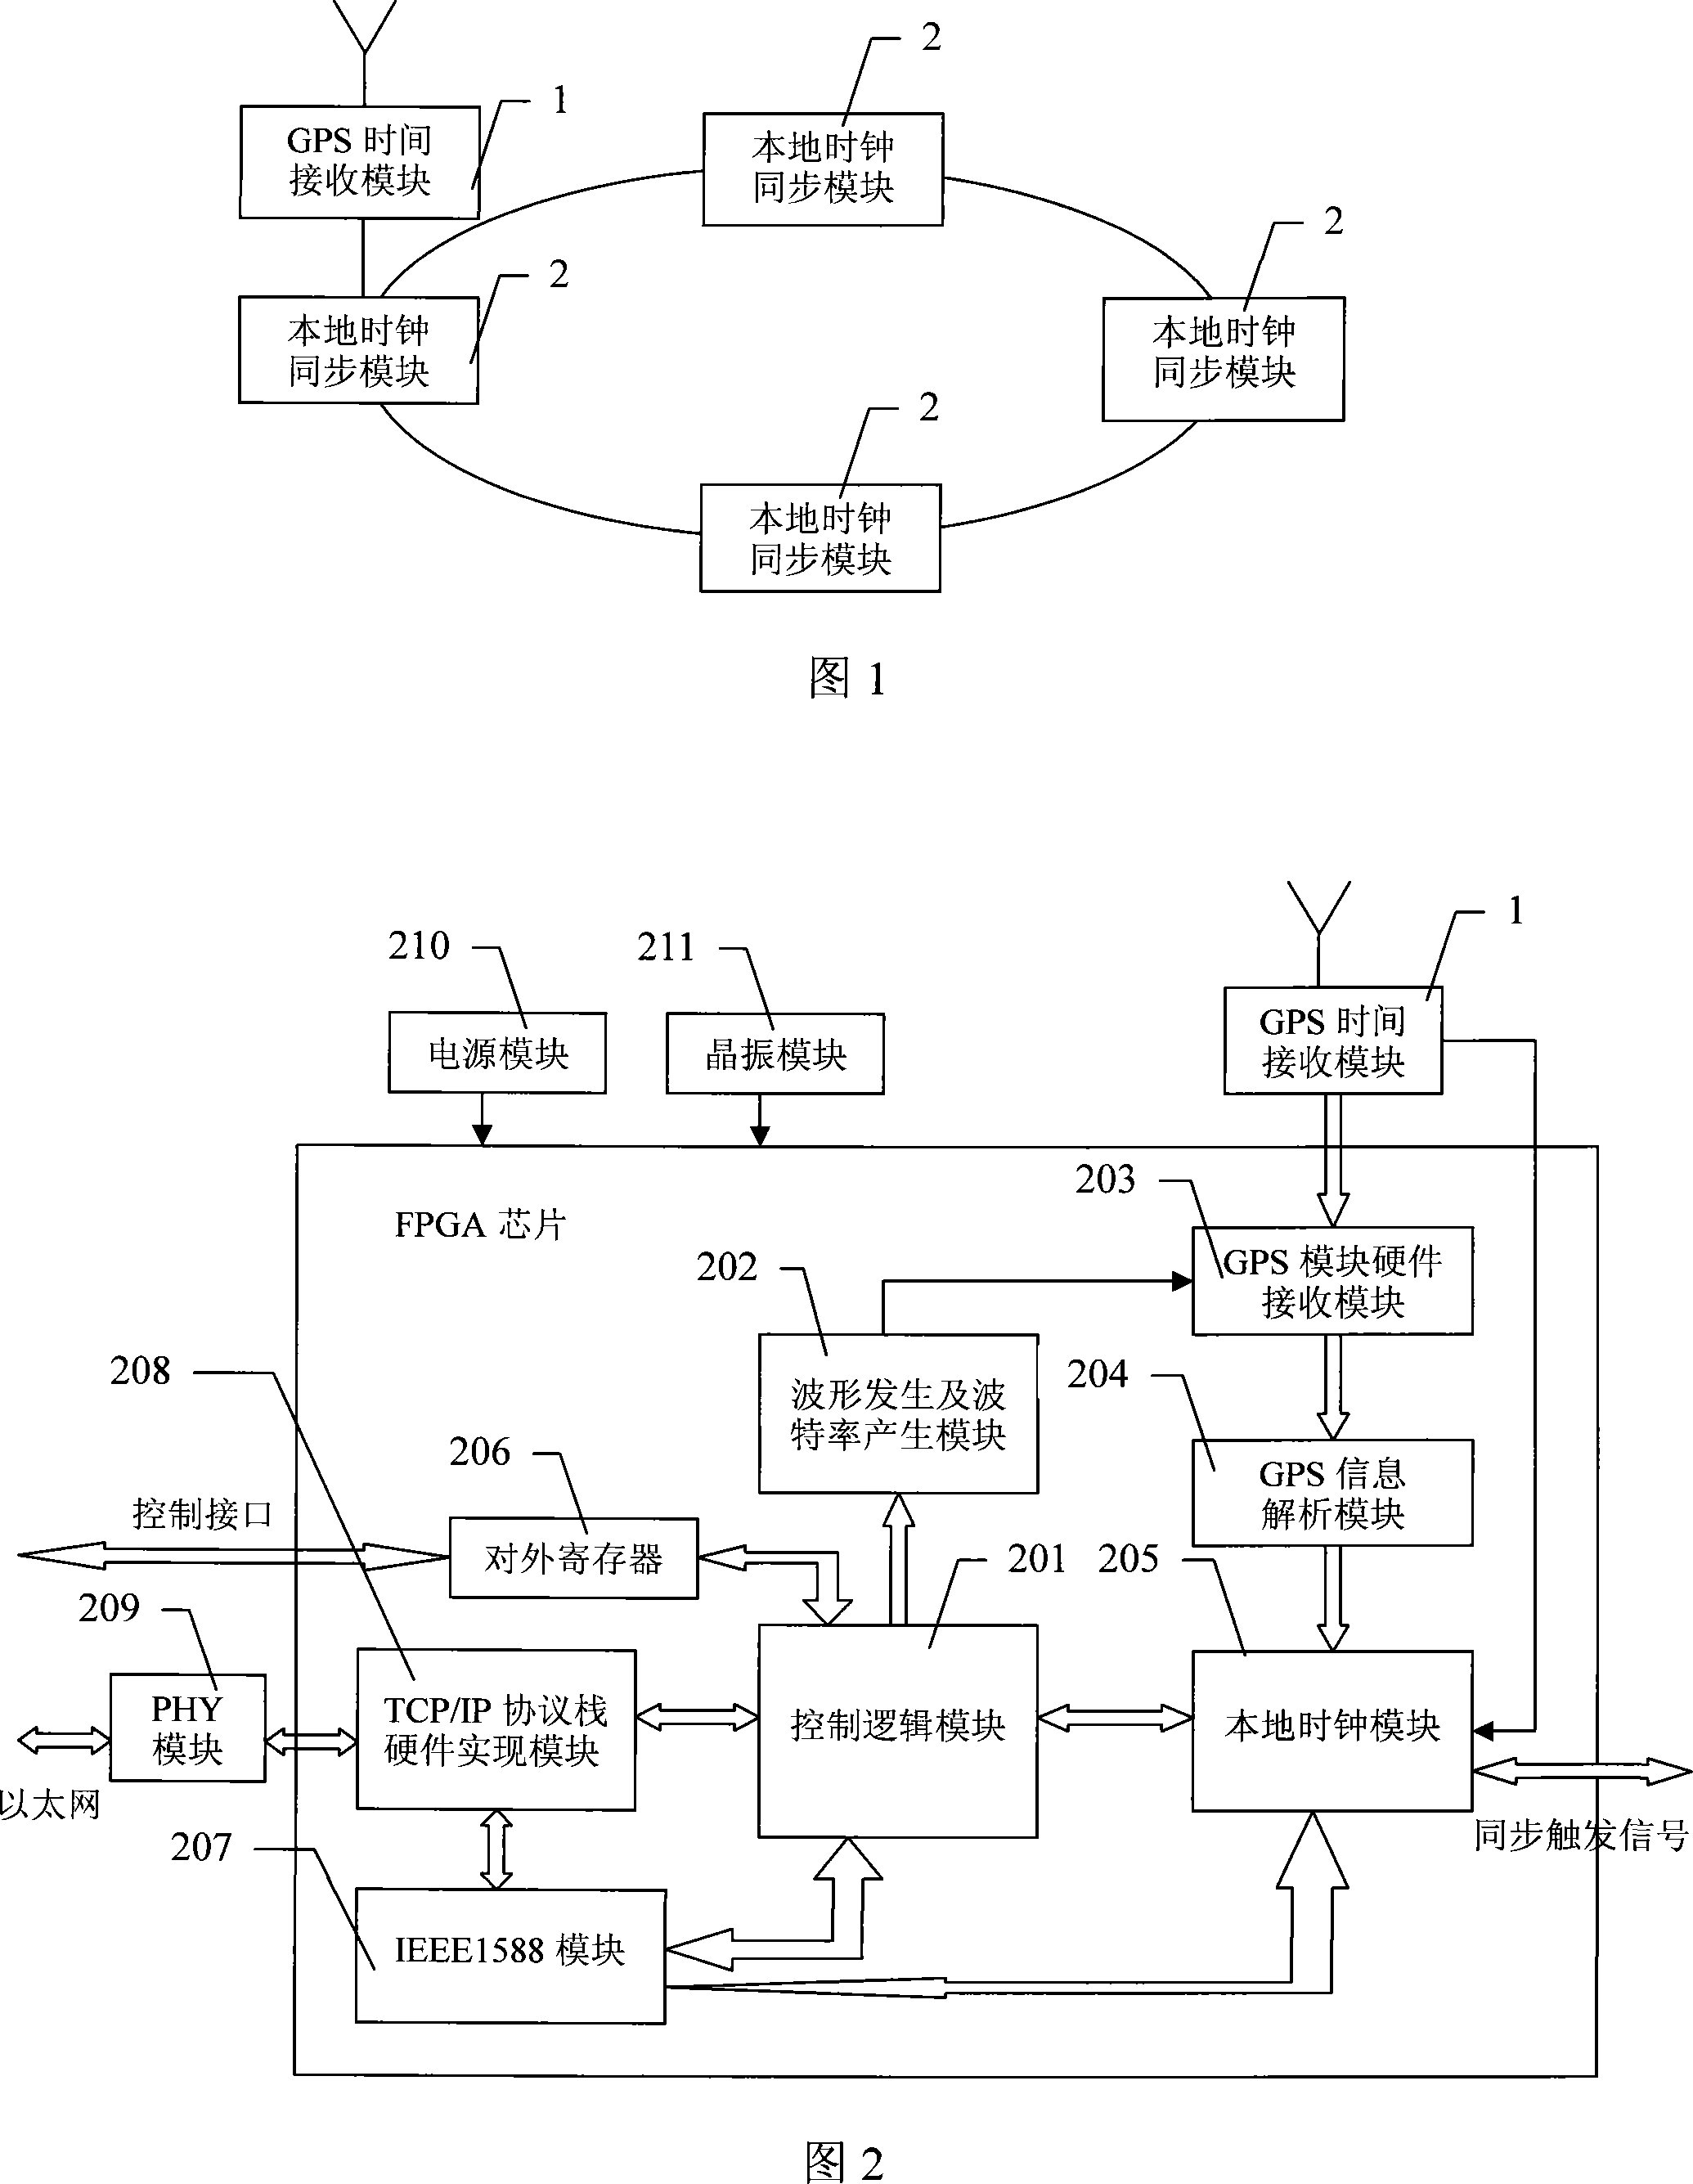 Clock synchronization device for synchronous phase measuring in power system